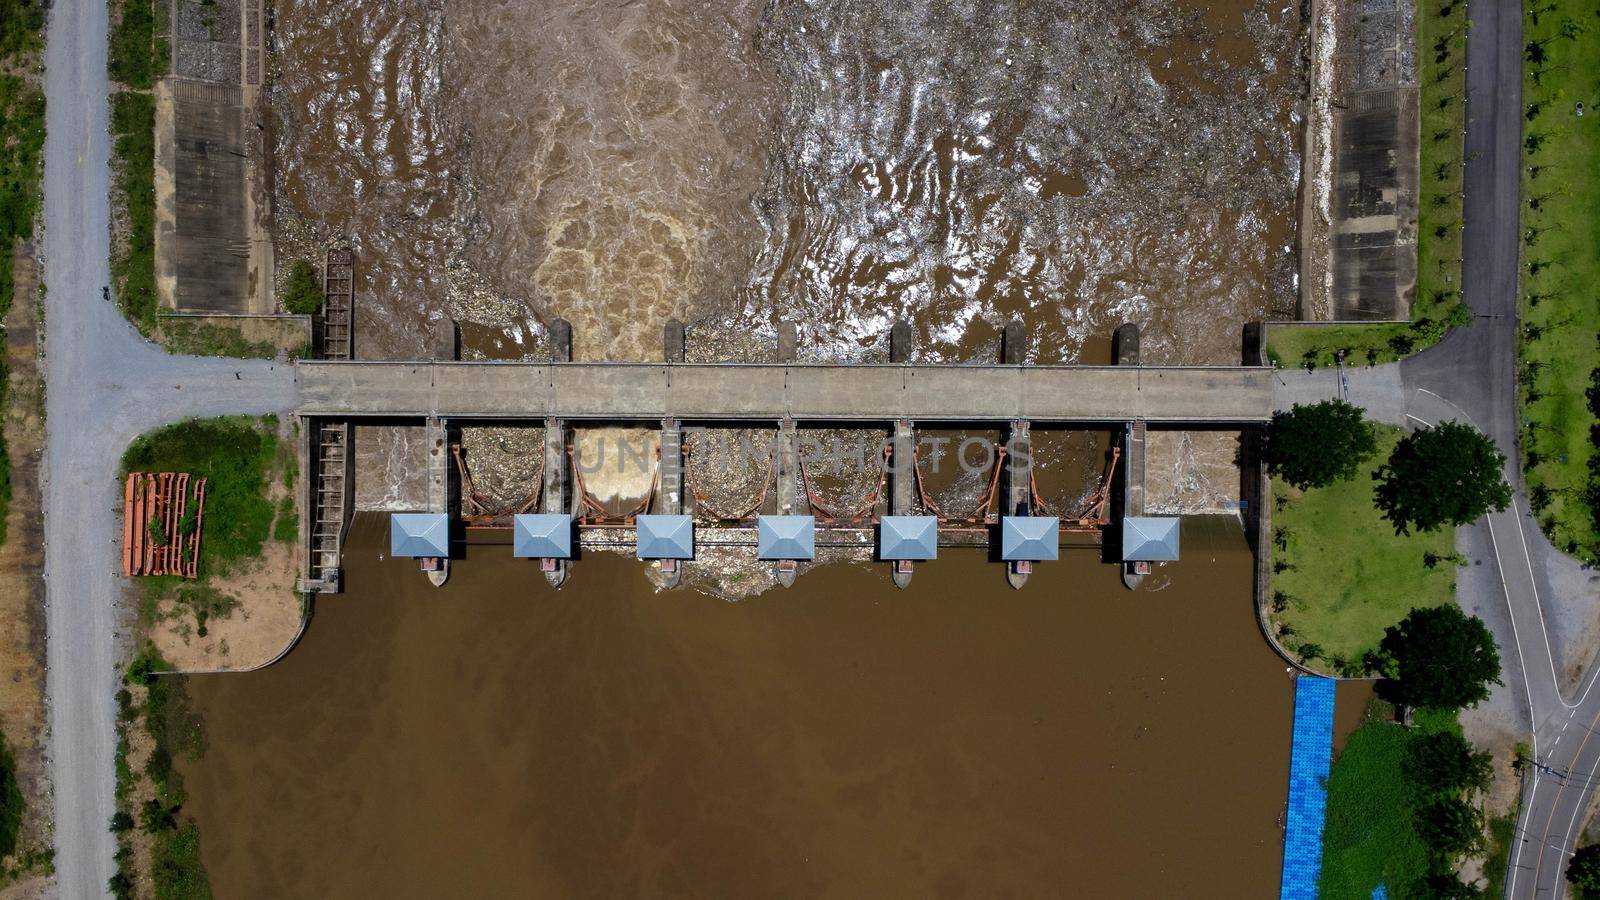 Aerial view of the water released from the concrete dam's drainage channel as the overflow in the rainy season. Top view of turbid brown forest water flows from a dam in rural northern Thailand. by TEERASAK